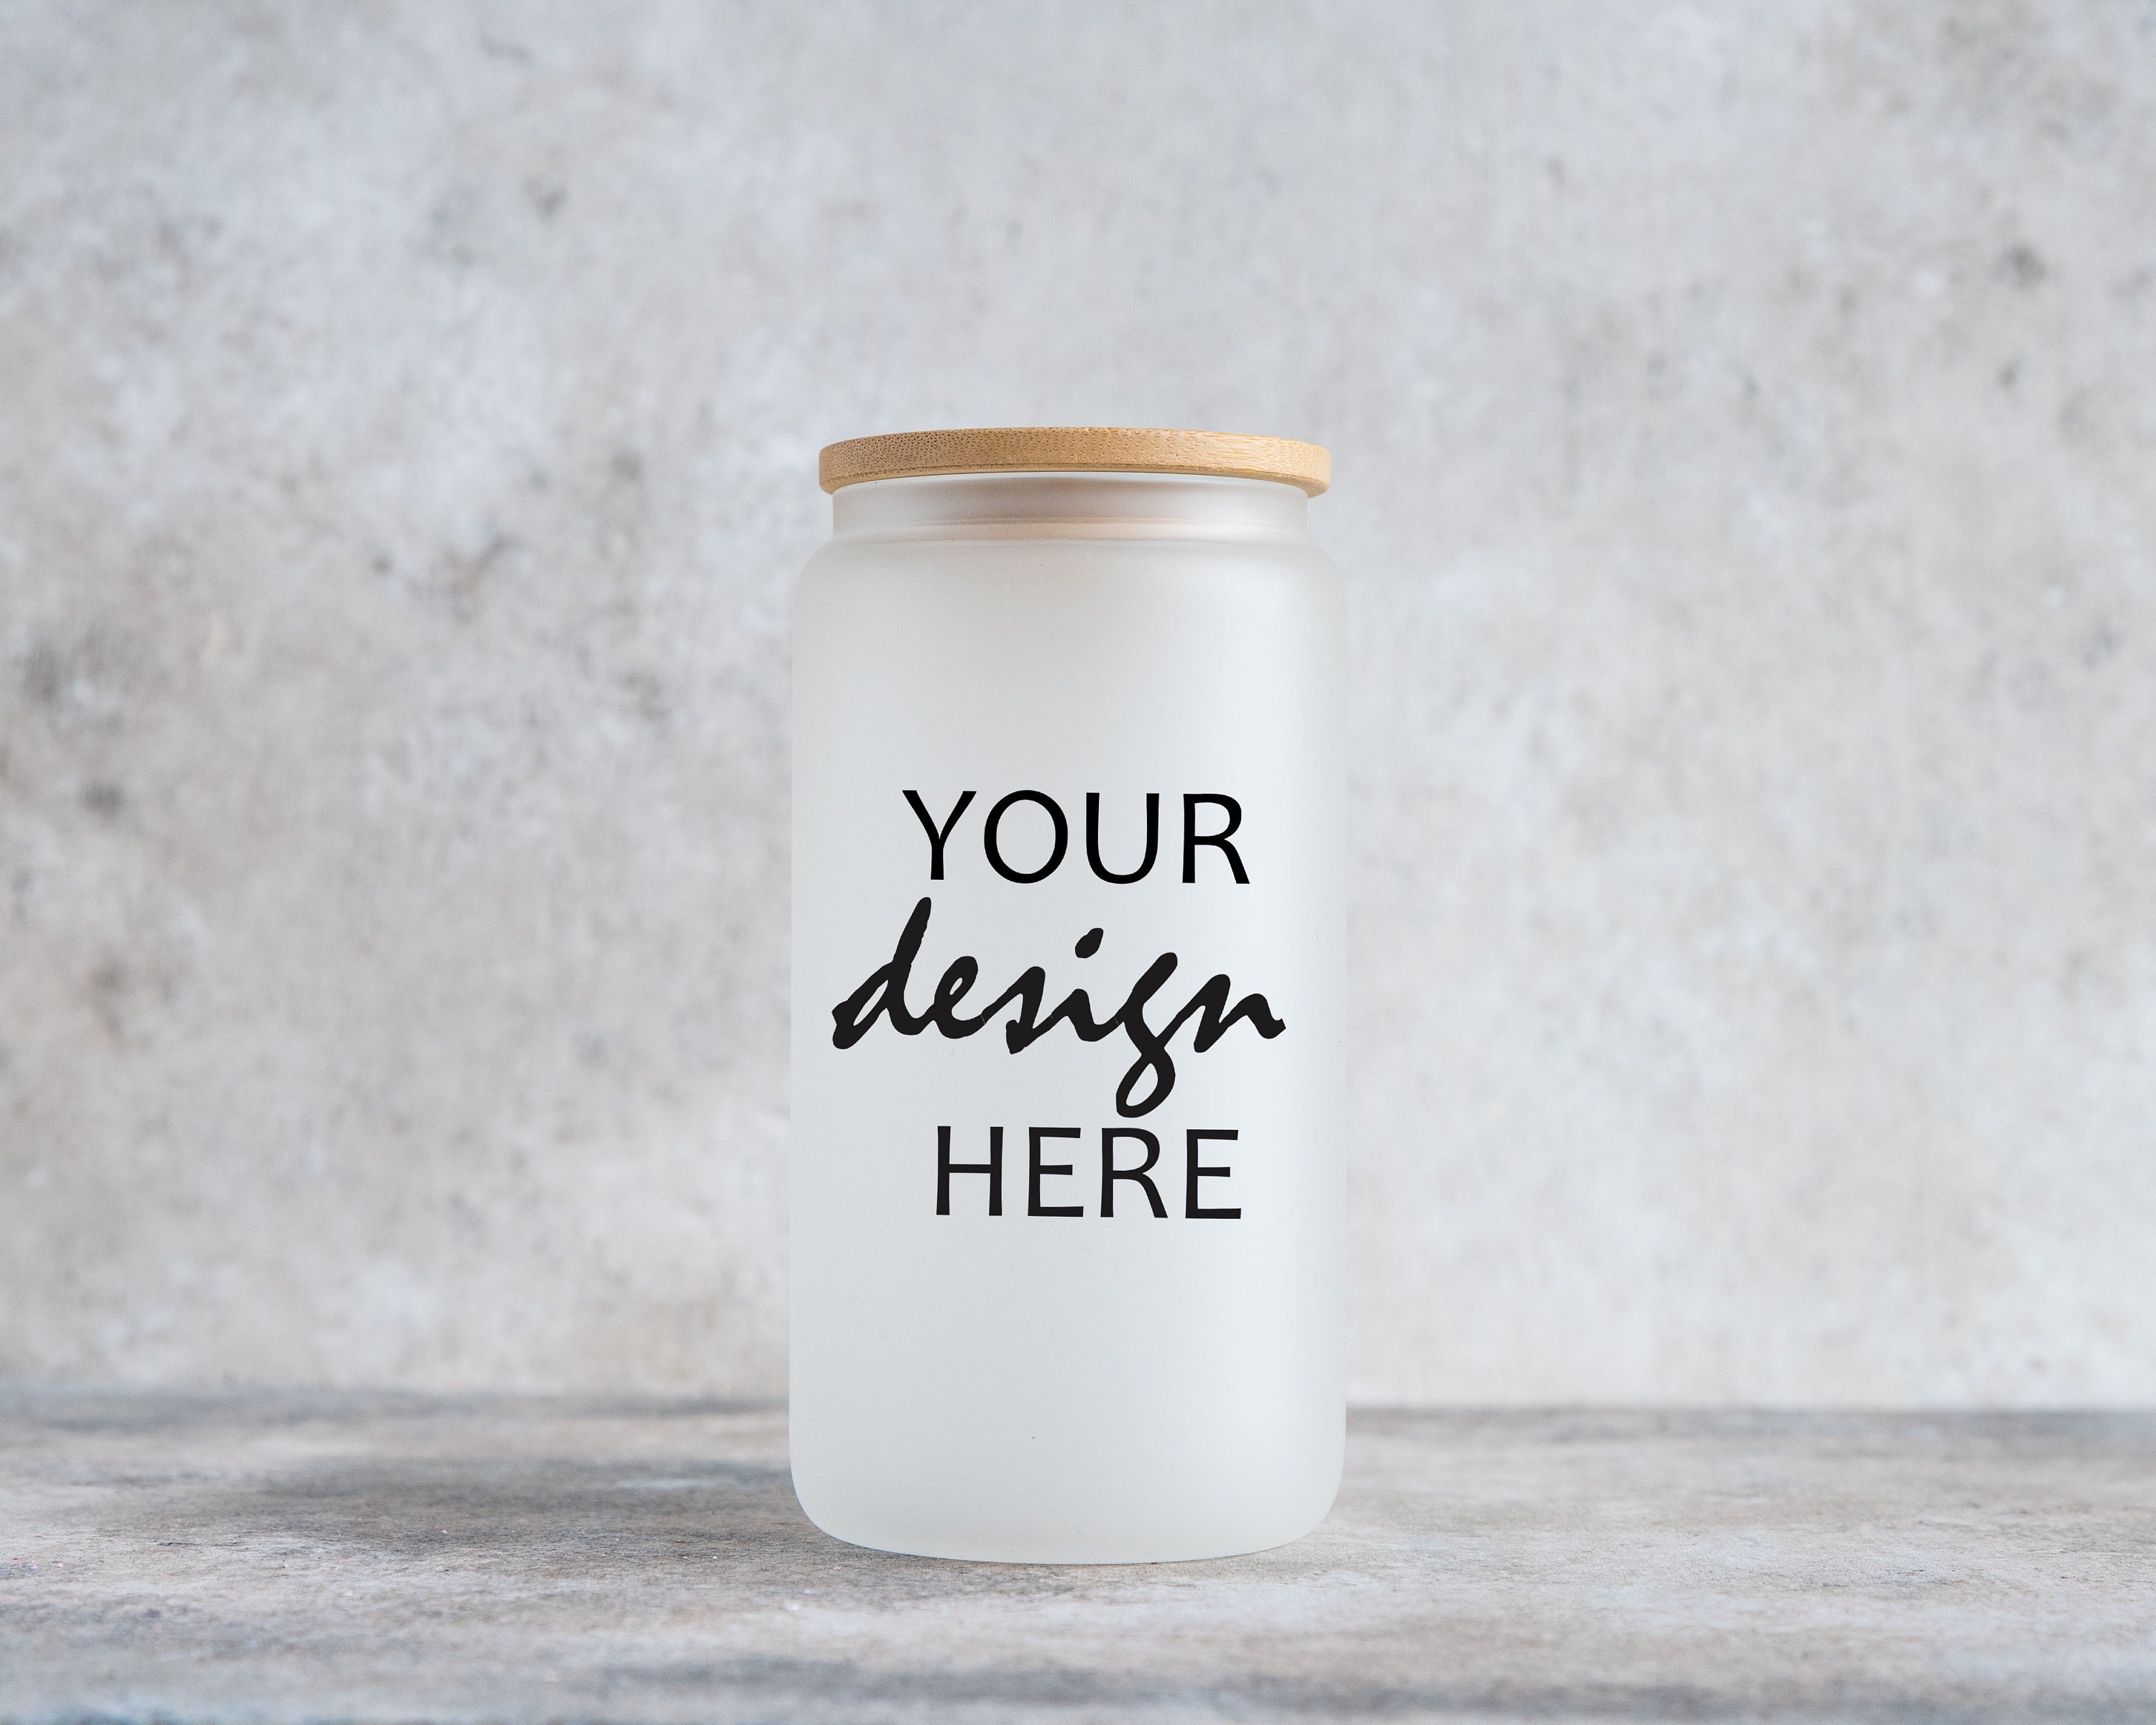 Glass Soda Cup With Ice Mockup - Free Download Images High Quality